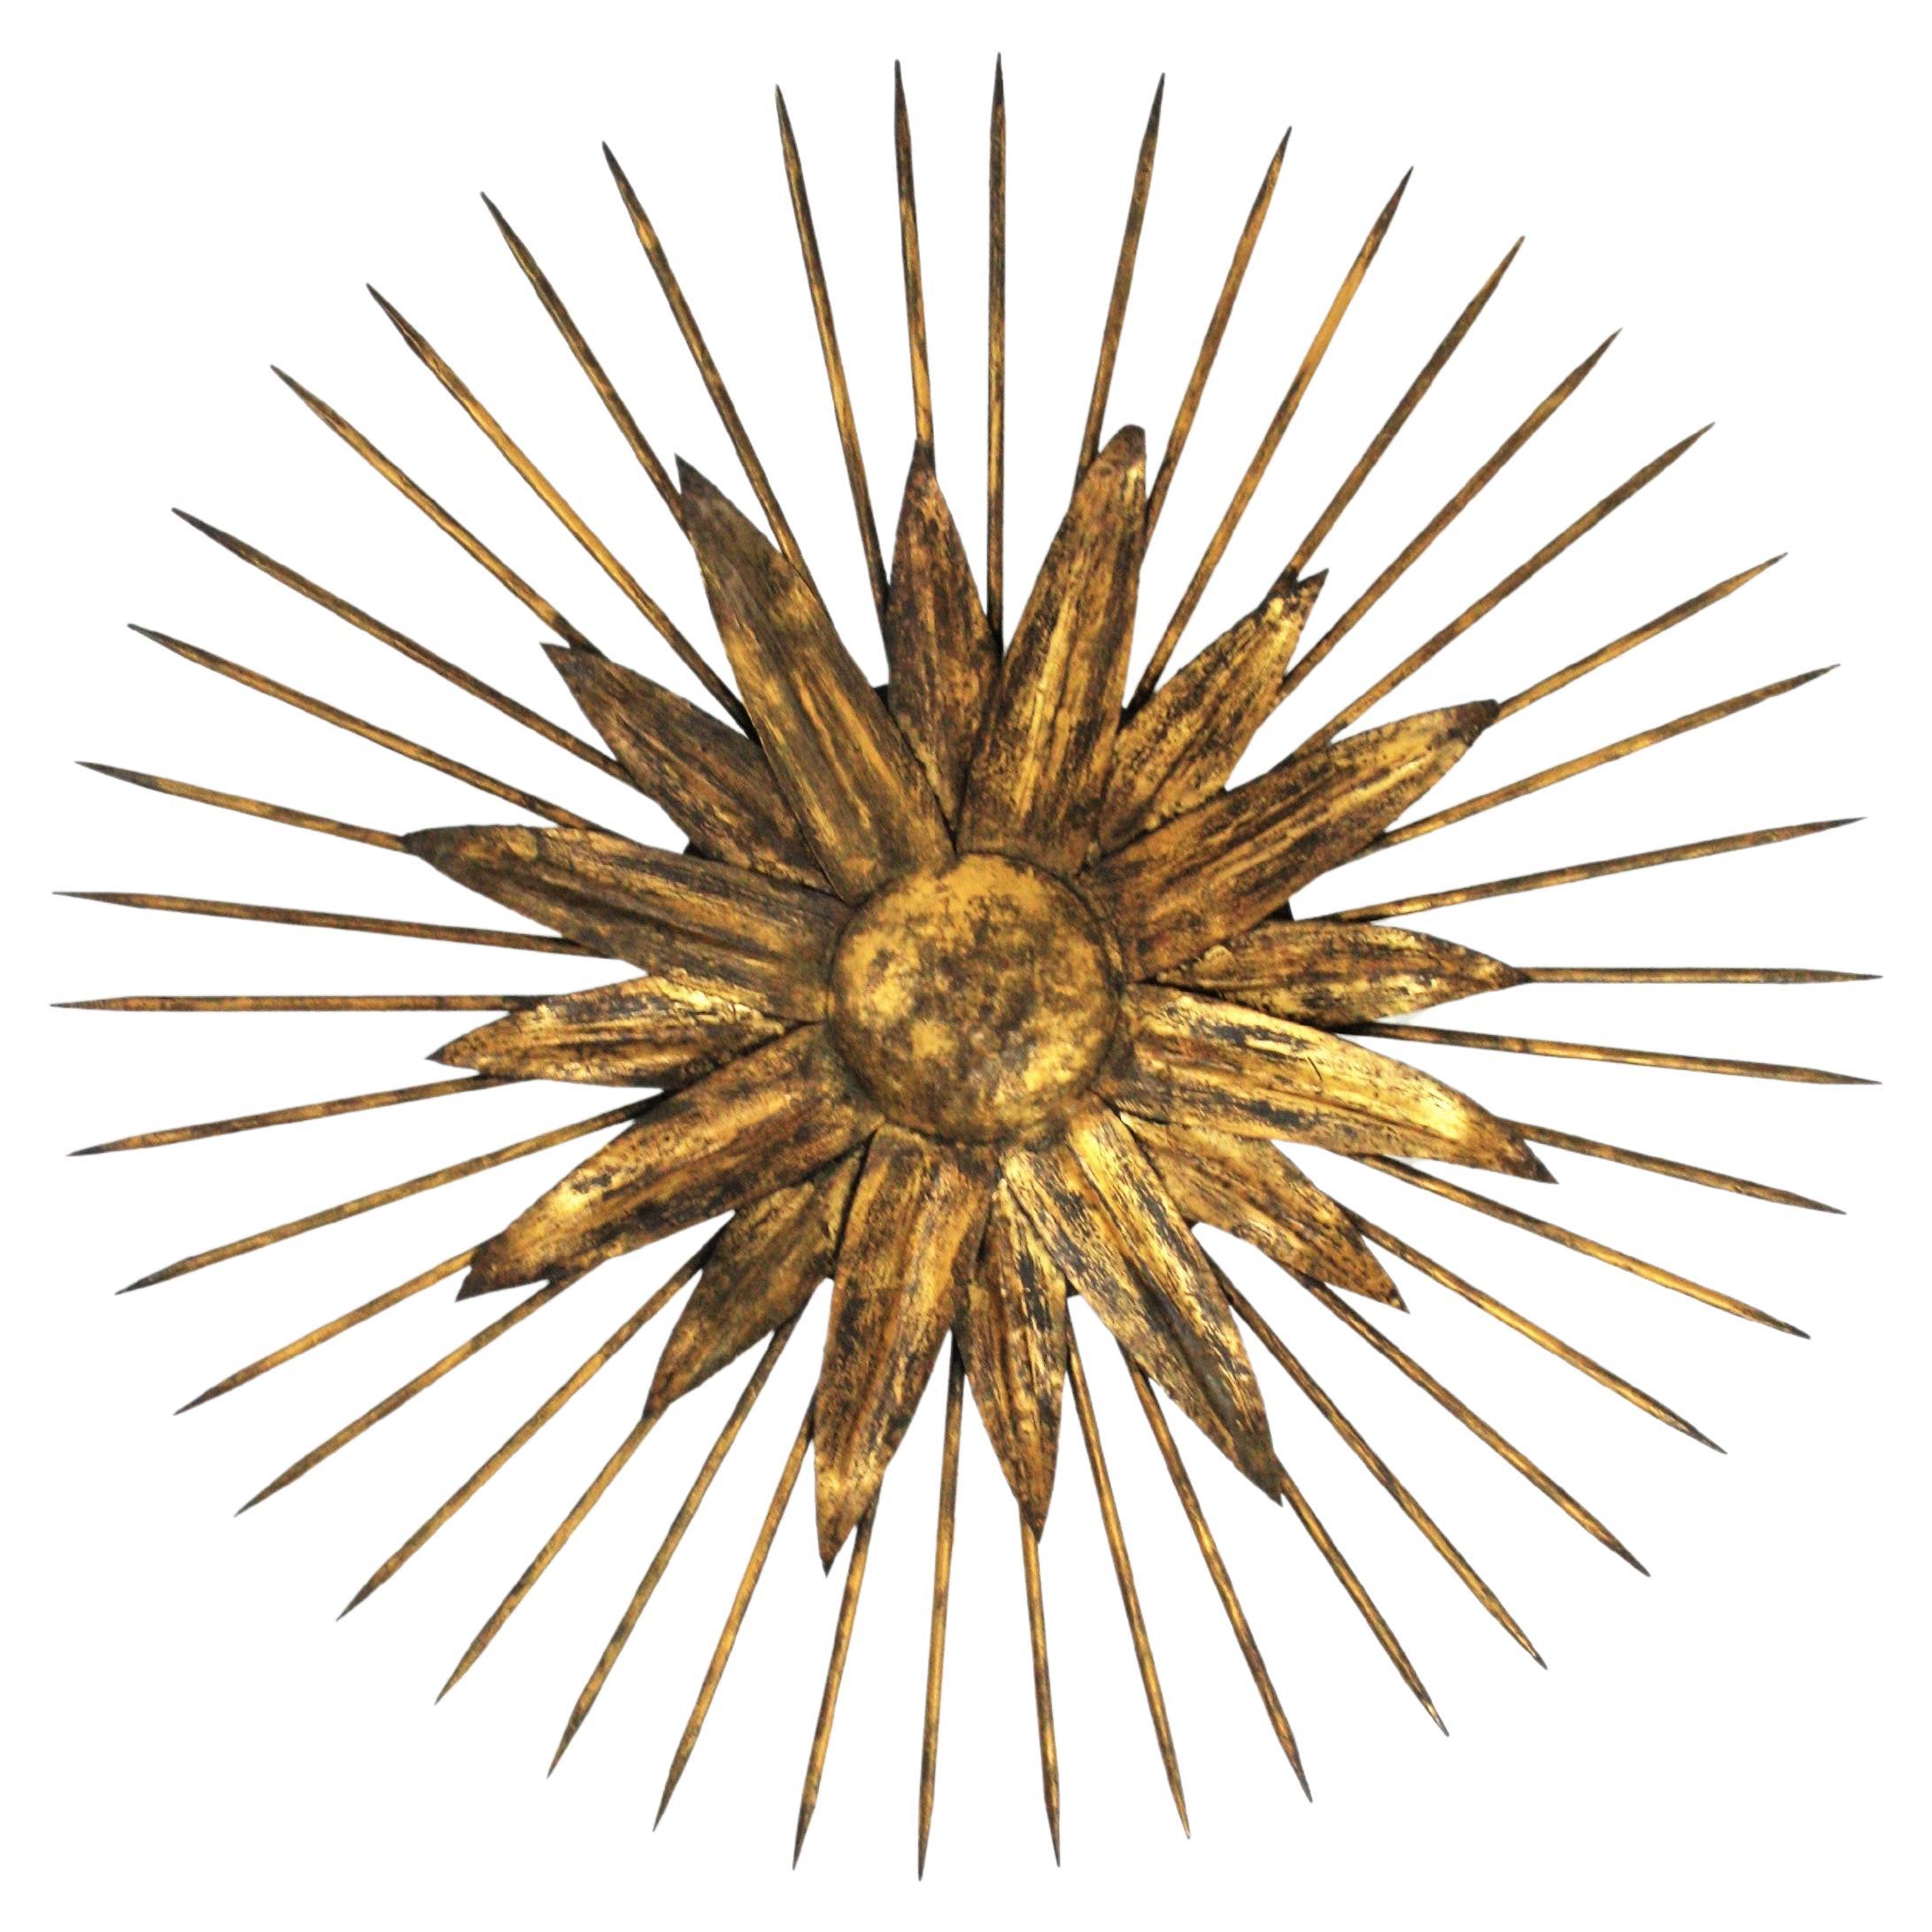 French Sunburst Light Fixture in Gilt Iron with Nail Detail, 1940s For Sale